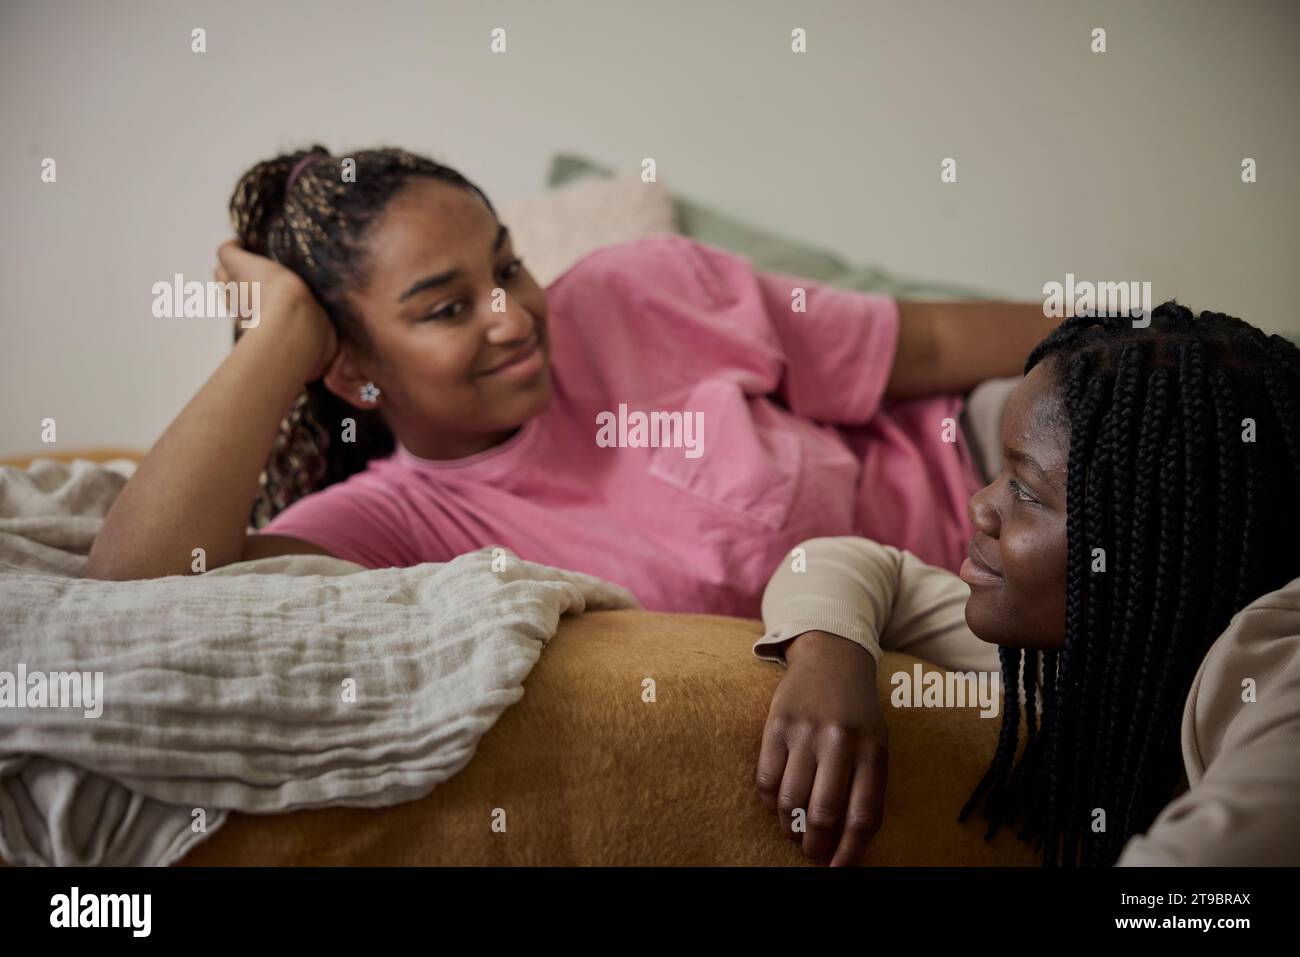 Teenage girl talking with female friend lying on bed in bedroom Stock Photo